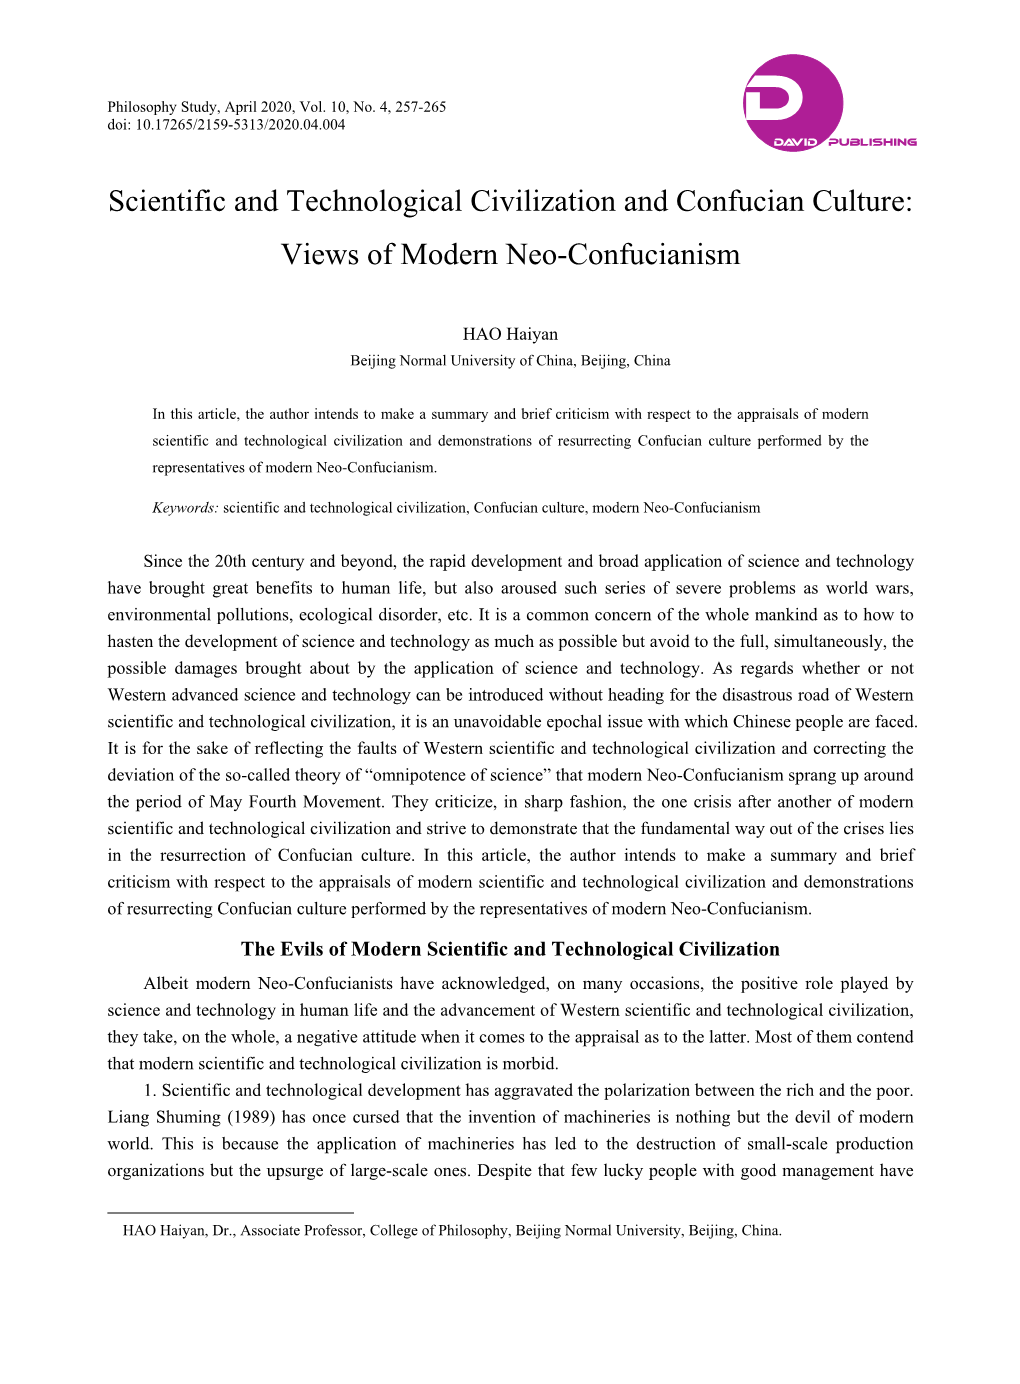 Scientific and Technological Civilization and Confucian Culture: Views of Modern Neo-Confucianism